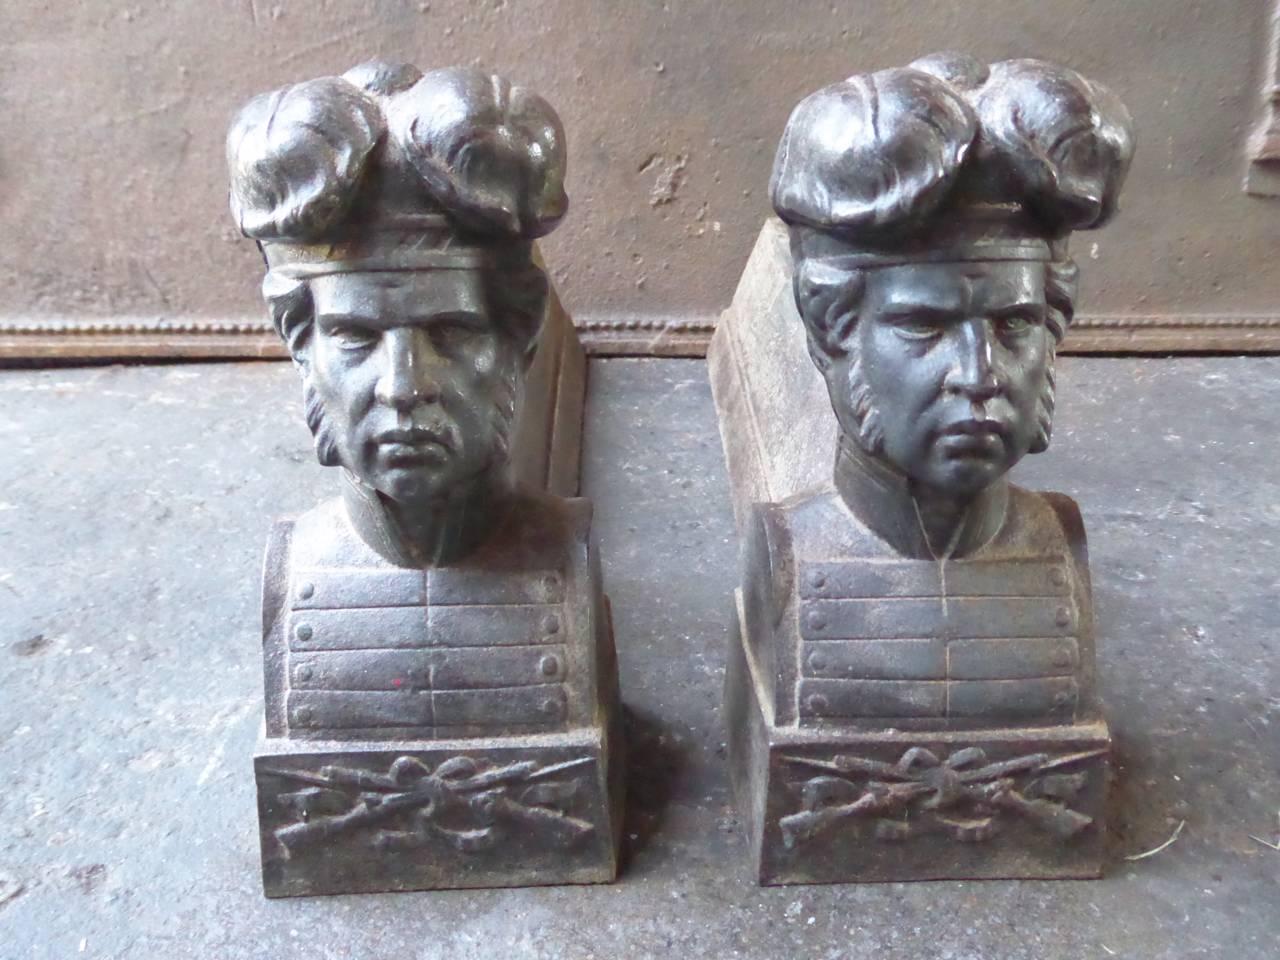 19th century French 'Man' andirons made of cast iron.

We have a unique and specialized collection of antique and used fireplace accessories consisting of more than 1000 listings at 1stdibs. Amongst others, we always have 300+ firebacks, 250+ pairs